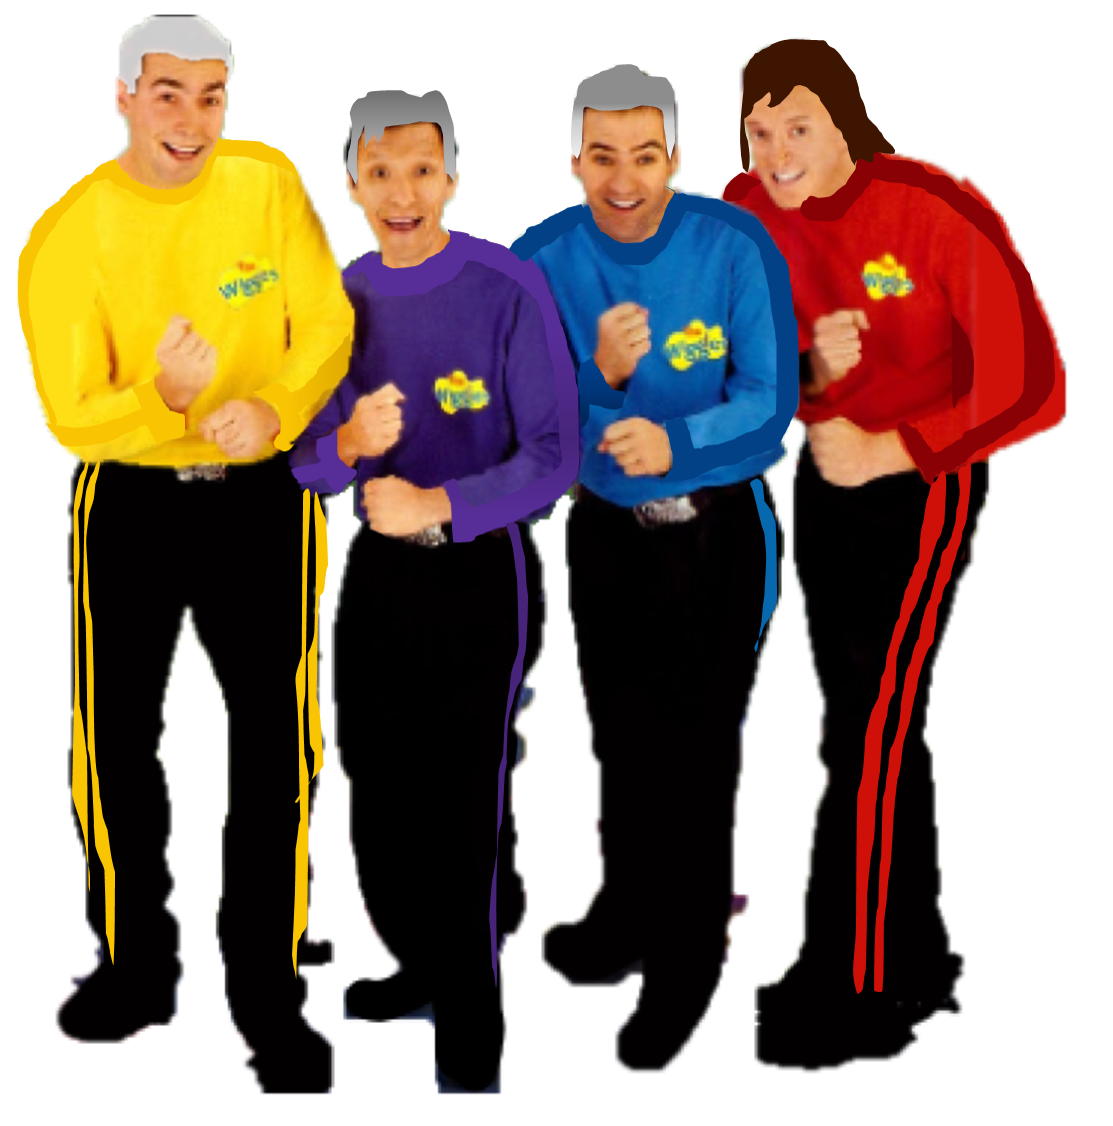 The OG Wiggles Reunion Tour (Fanmade PNG) by Trevorhines on DeviantArt